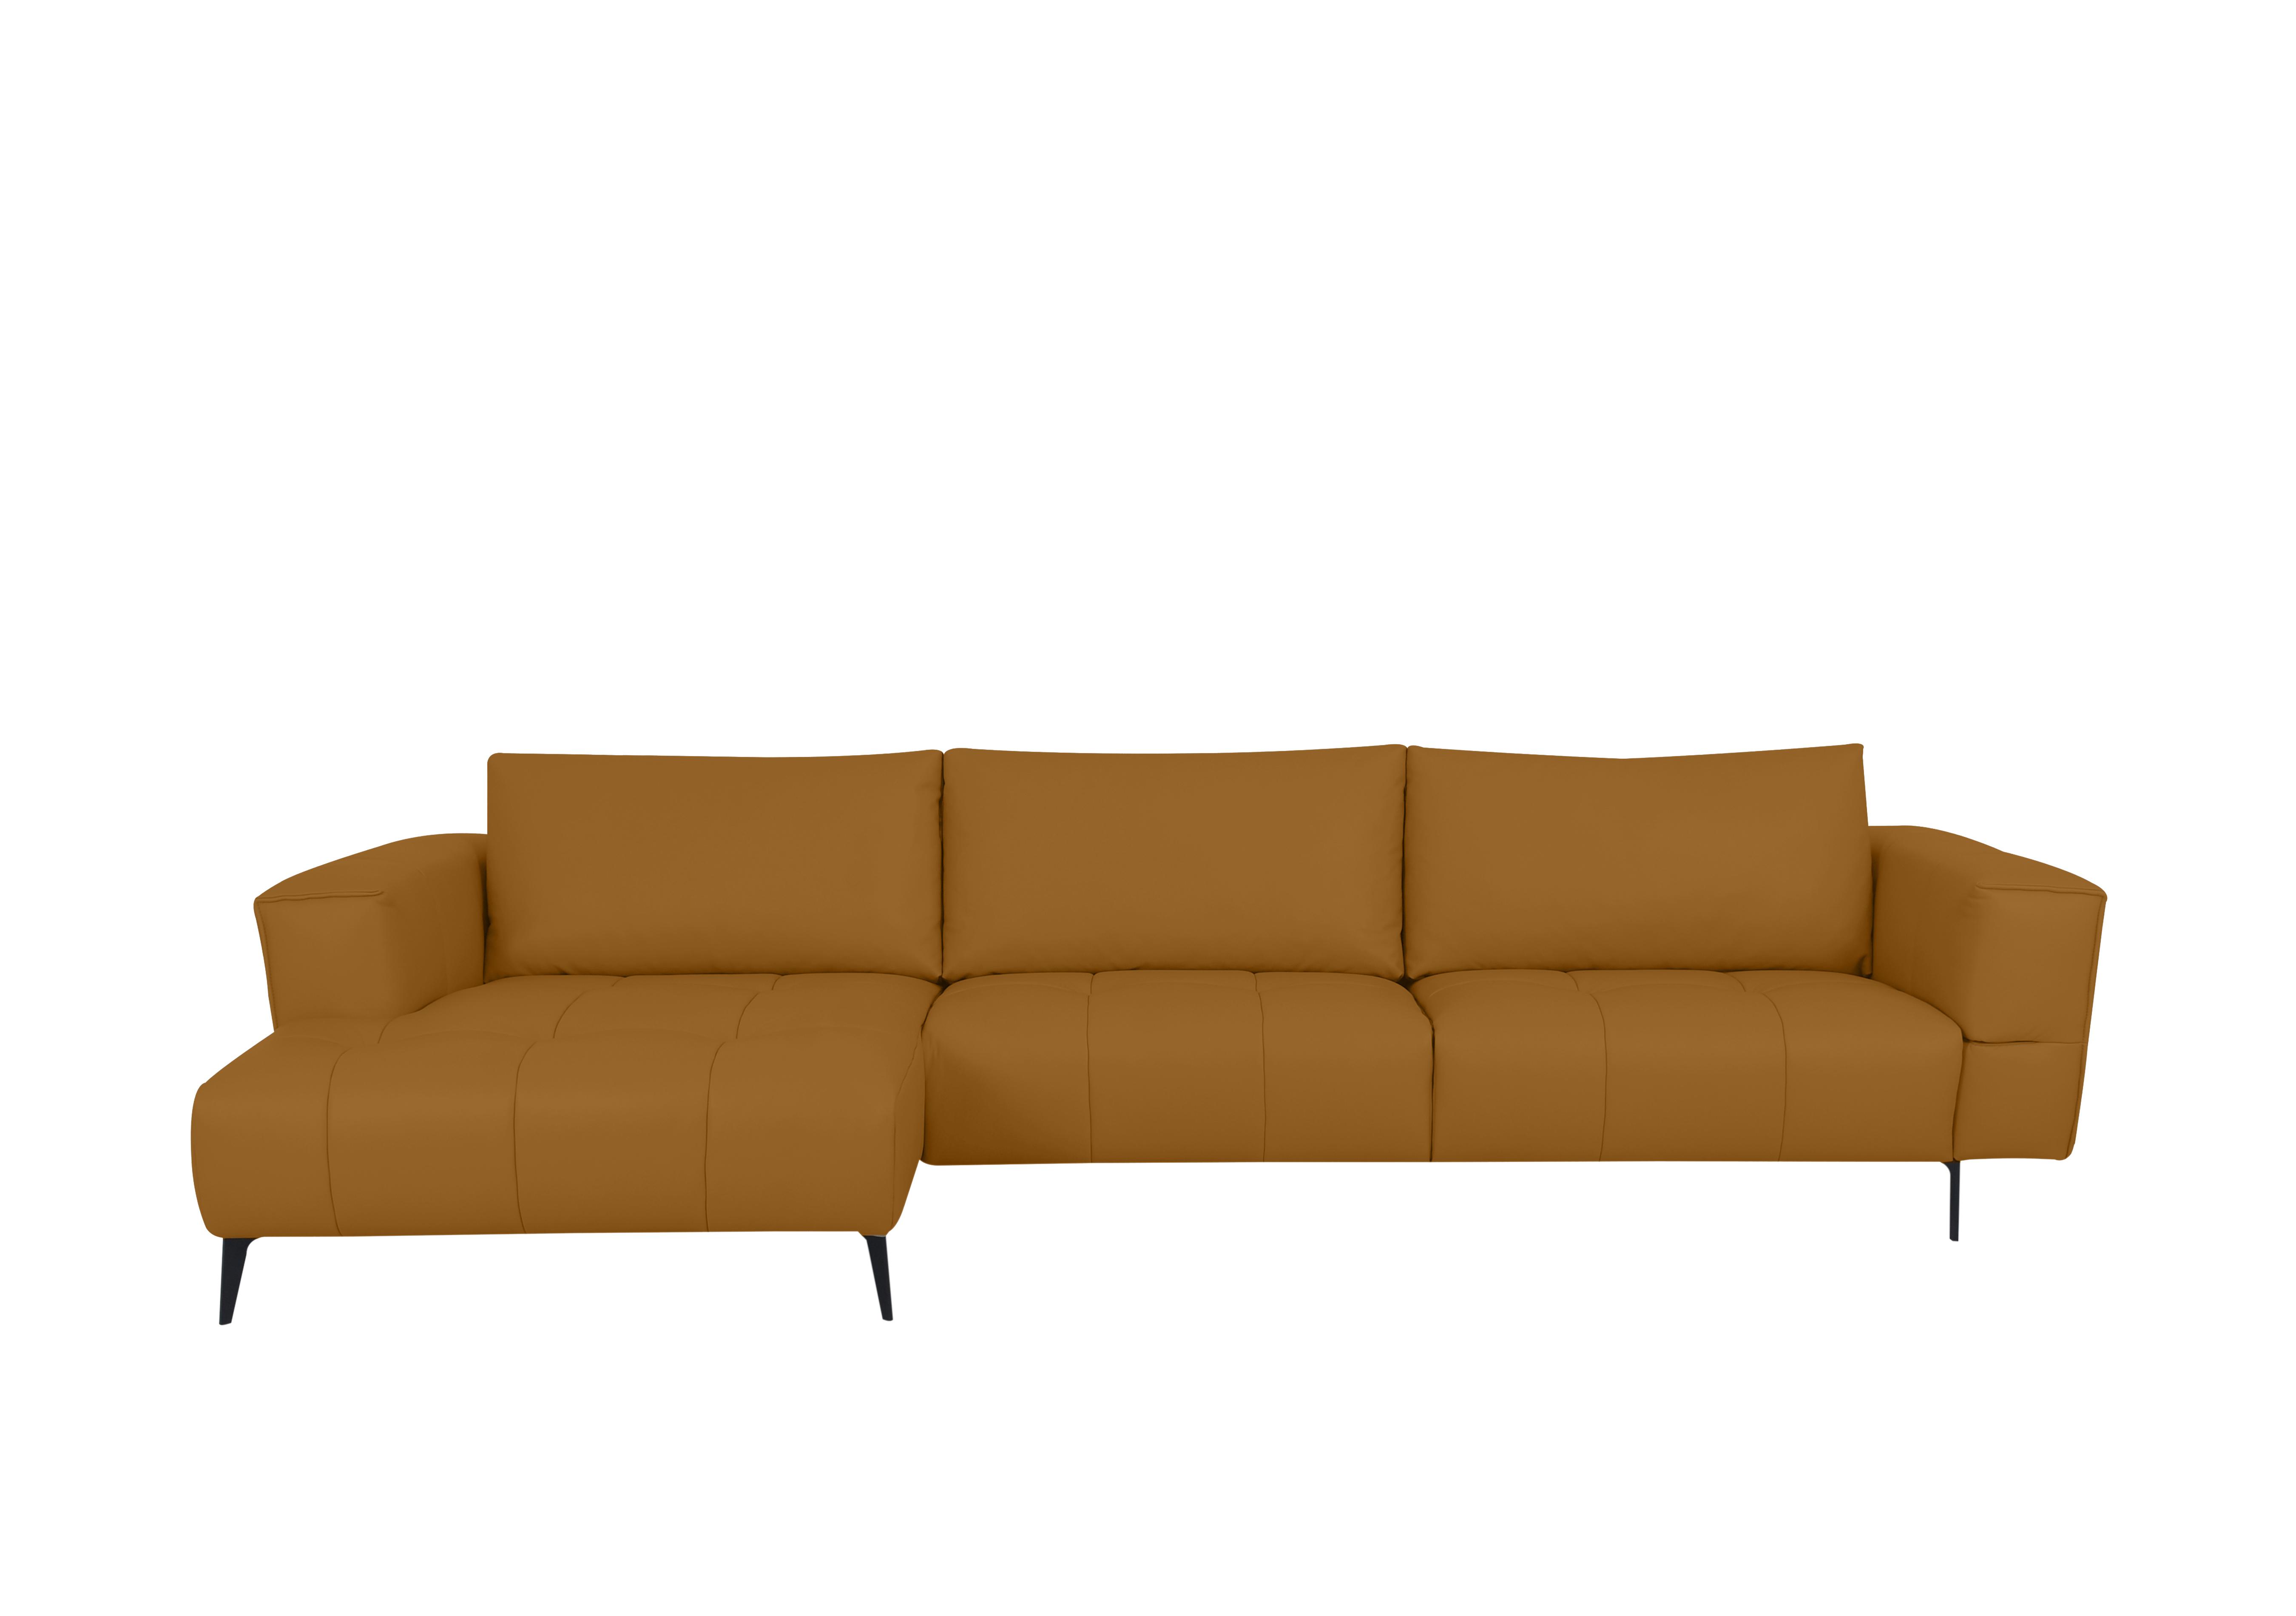 Lawson Leather Chaise End Sofa in Np-606e Honey Yellow on Furniture Village